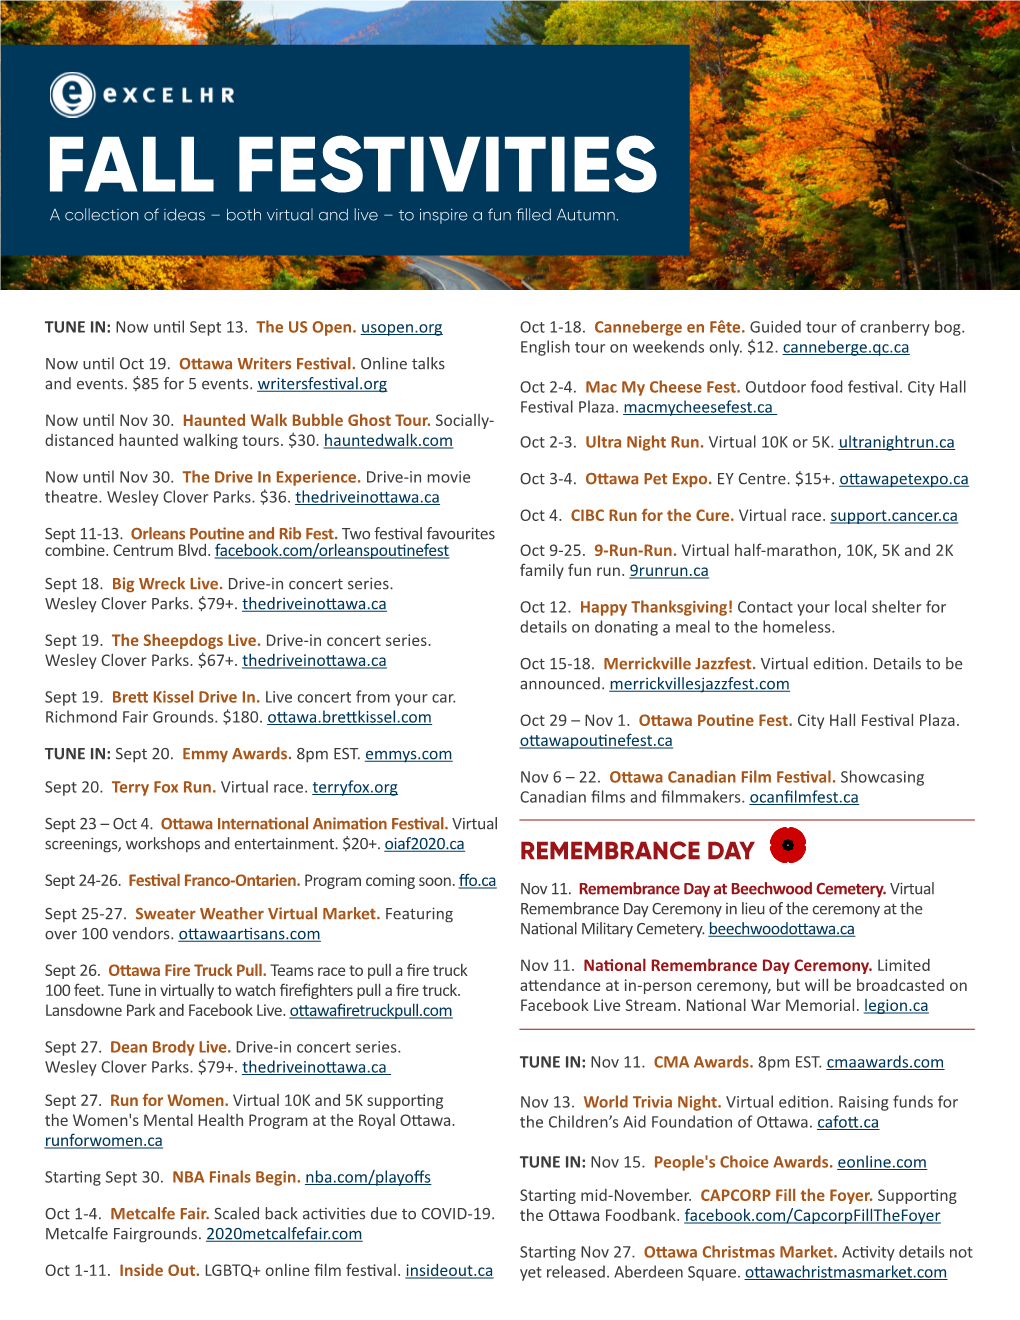 FALL FESTIVITIES a Collection of Ideas – Both Virtual and Live – to Inspire a Fun Filled Autumn